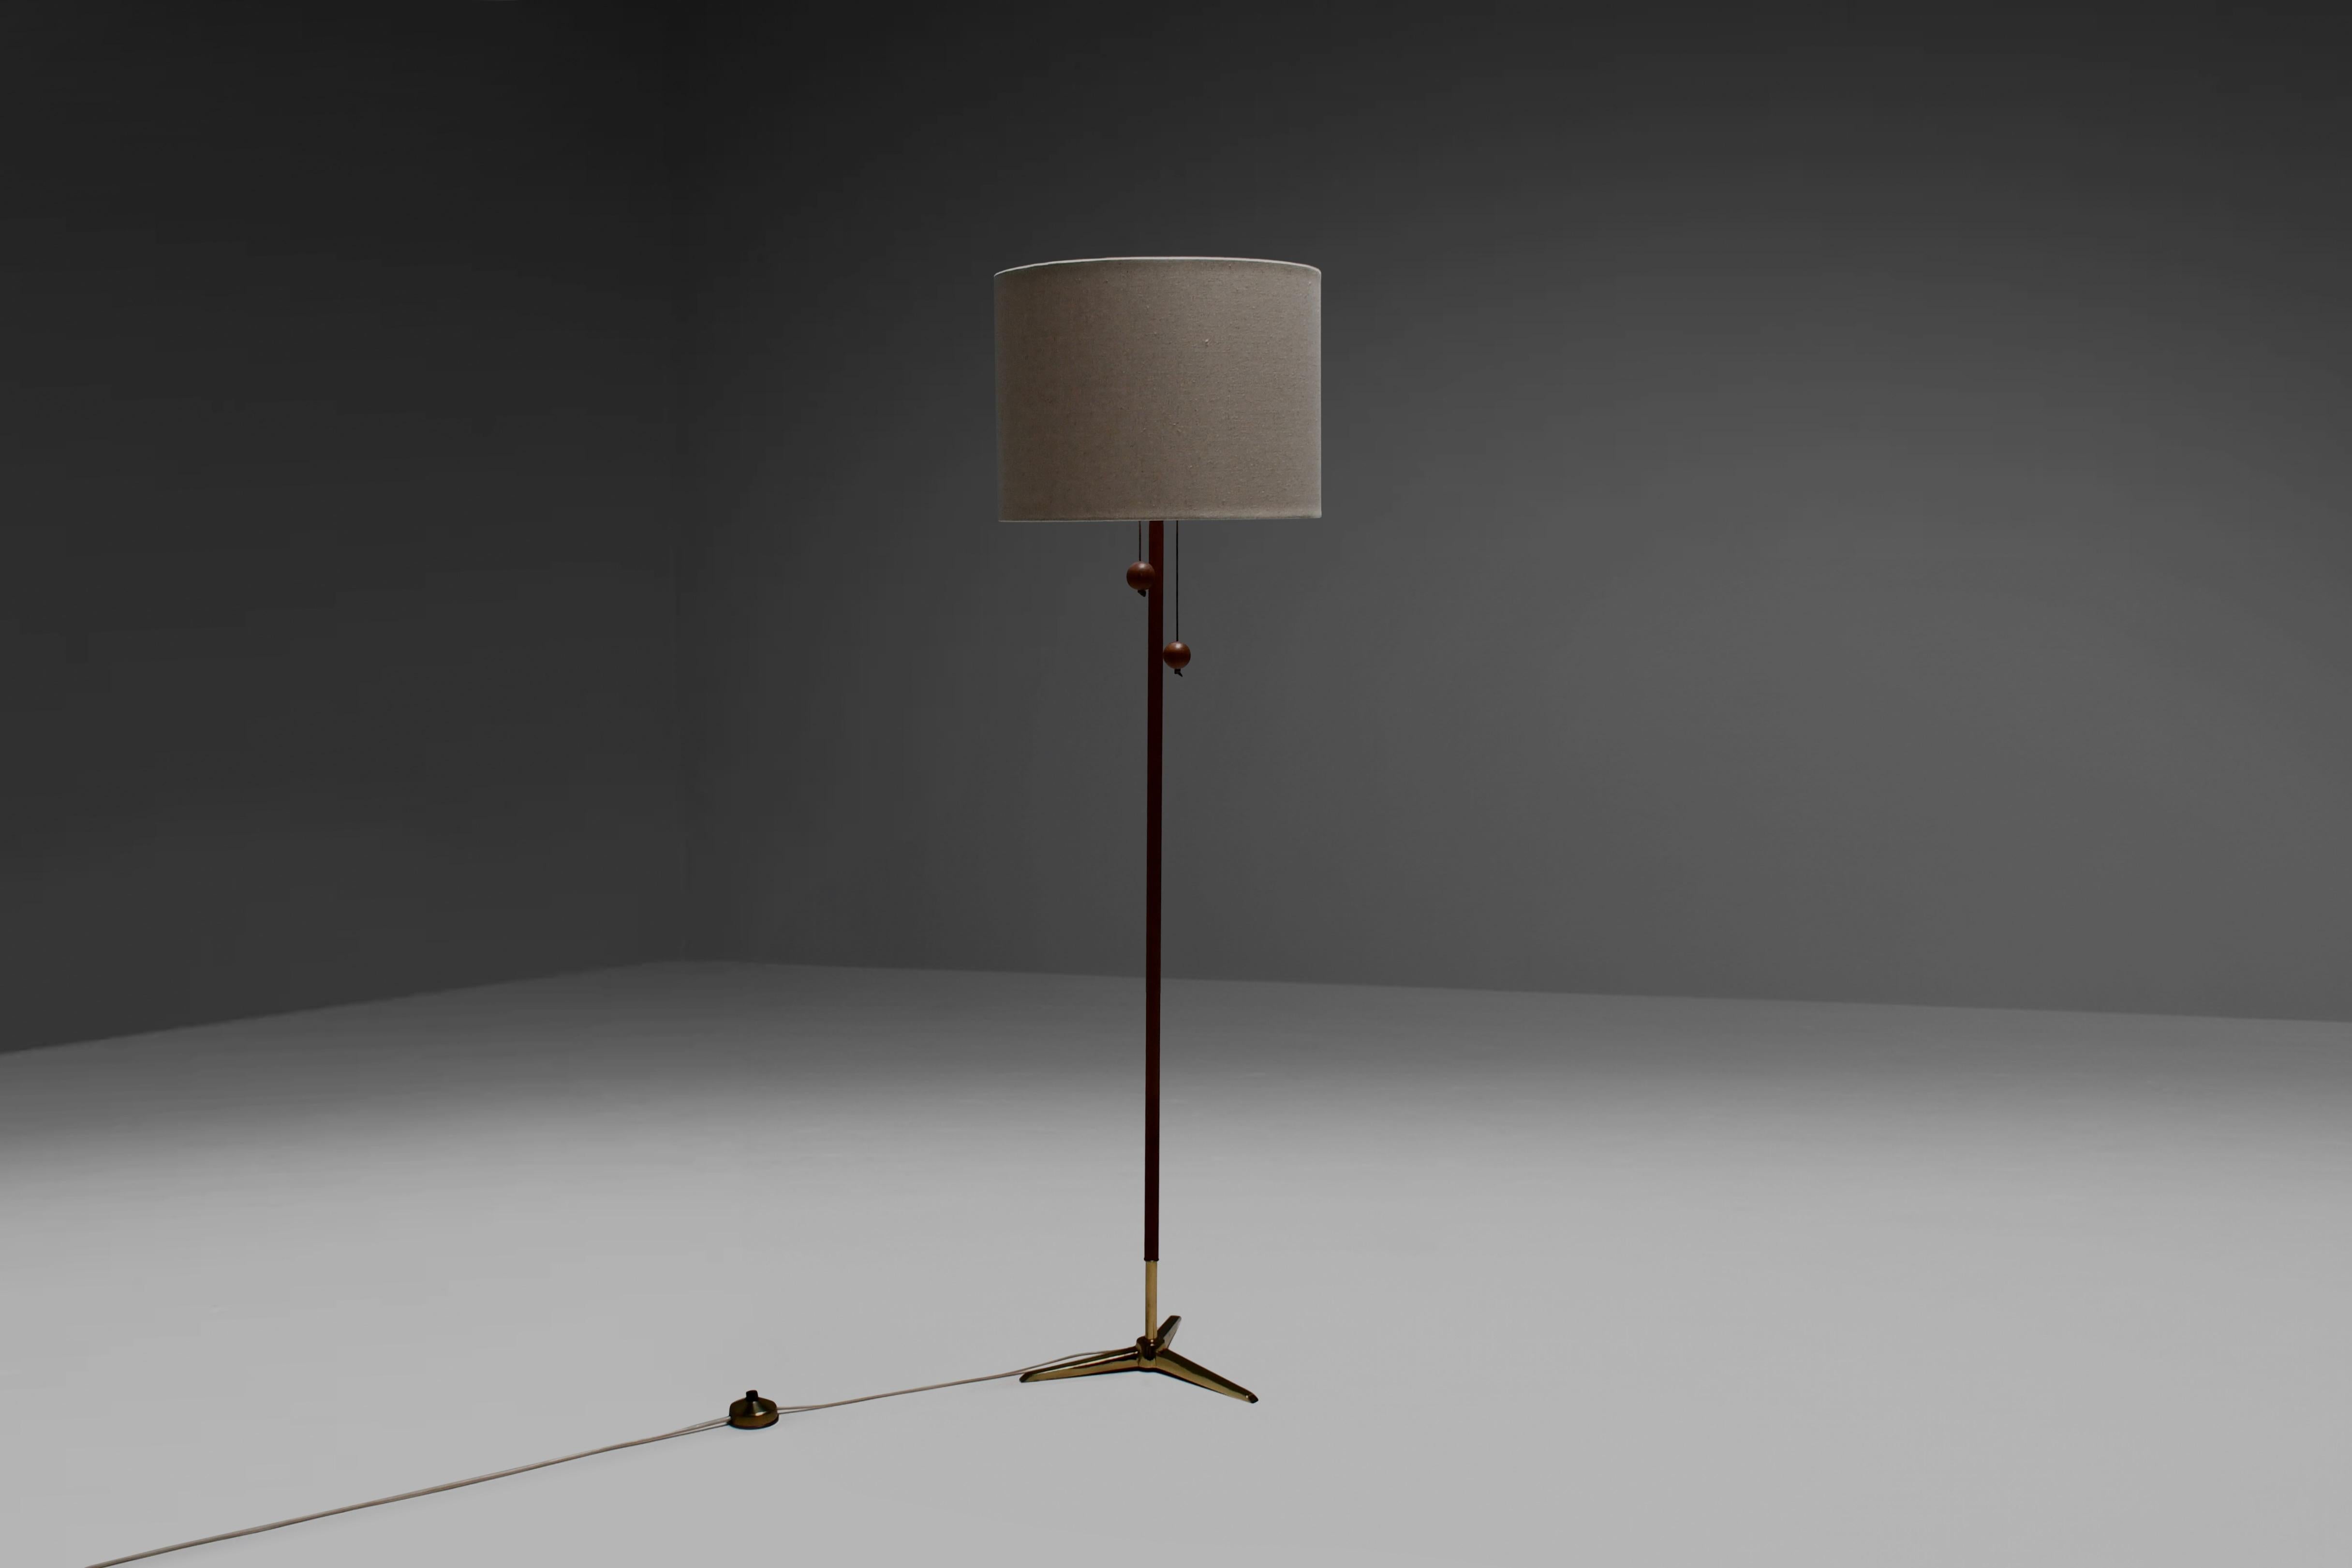 Beautiful Danish floor lamp in very good condition.

Manufactured by Fog & Morup Copenhagen in the 1960s 

The slender tapered stem of the lamp is made from solid teak wood. 

The tripod base is made from solid brass and looks very elegant.  

We